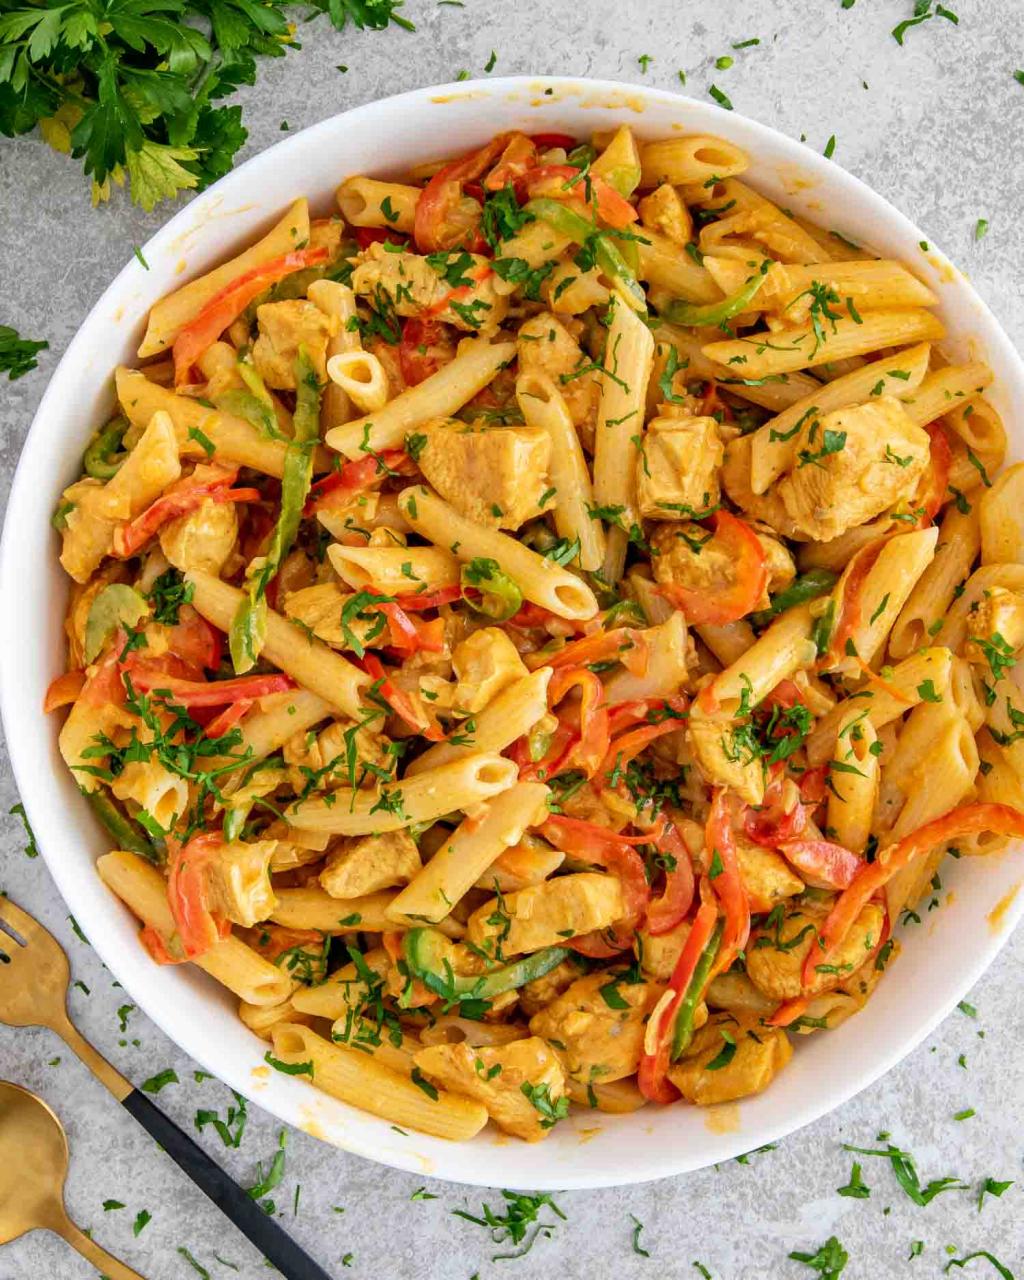 Buffalo Chicken Pasta - Craving Home Cooked